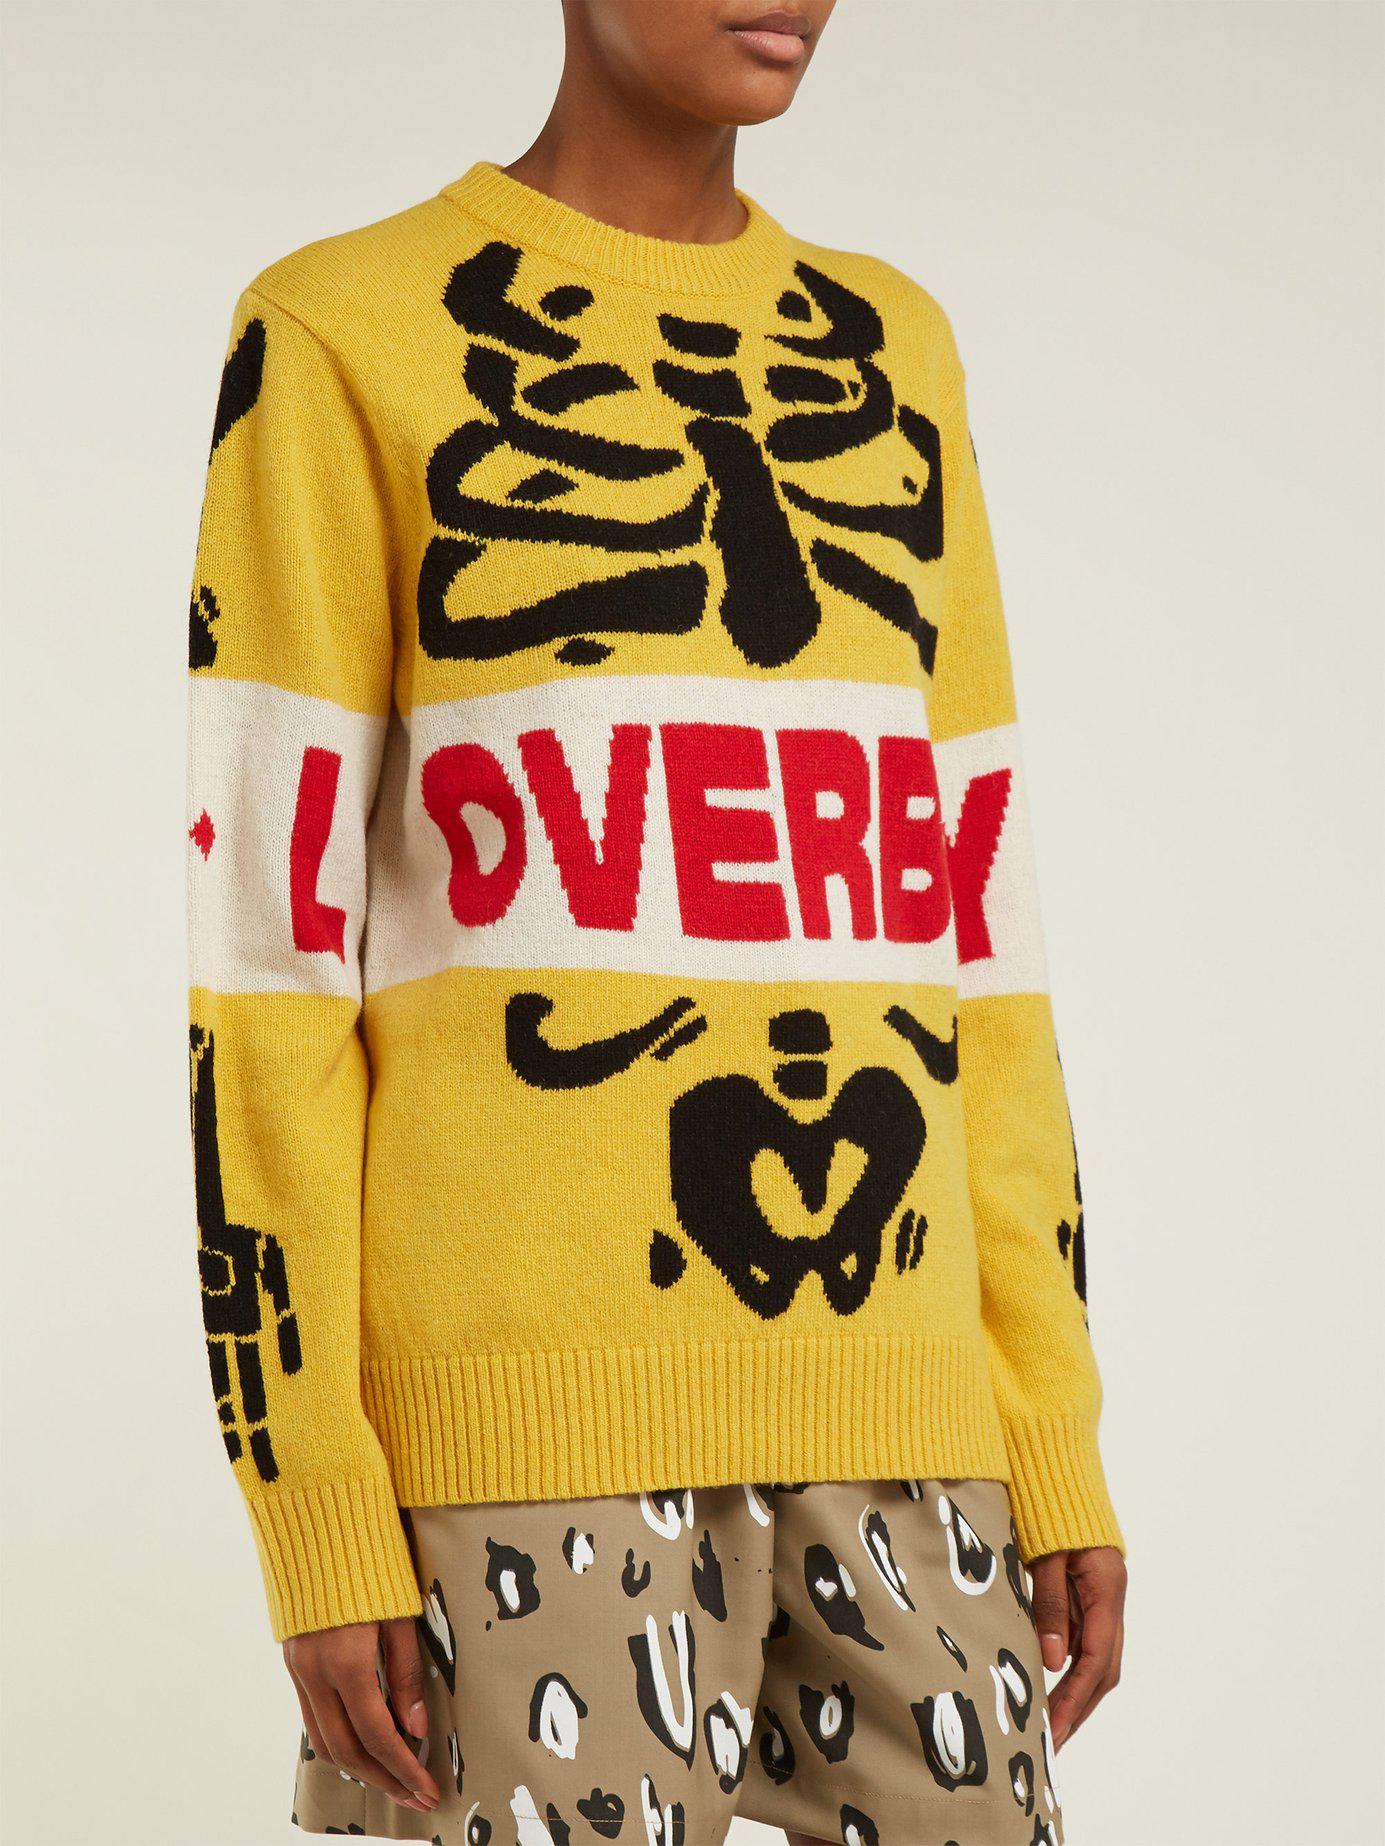 Charles Jeffrey Ribcage Wool Sweater in Yellow | Lyst